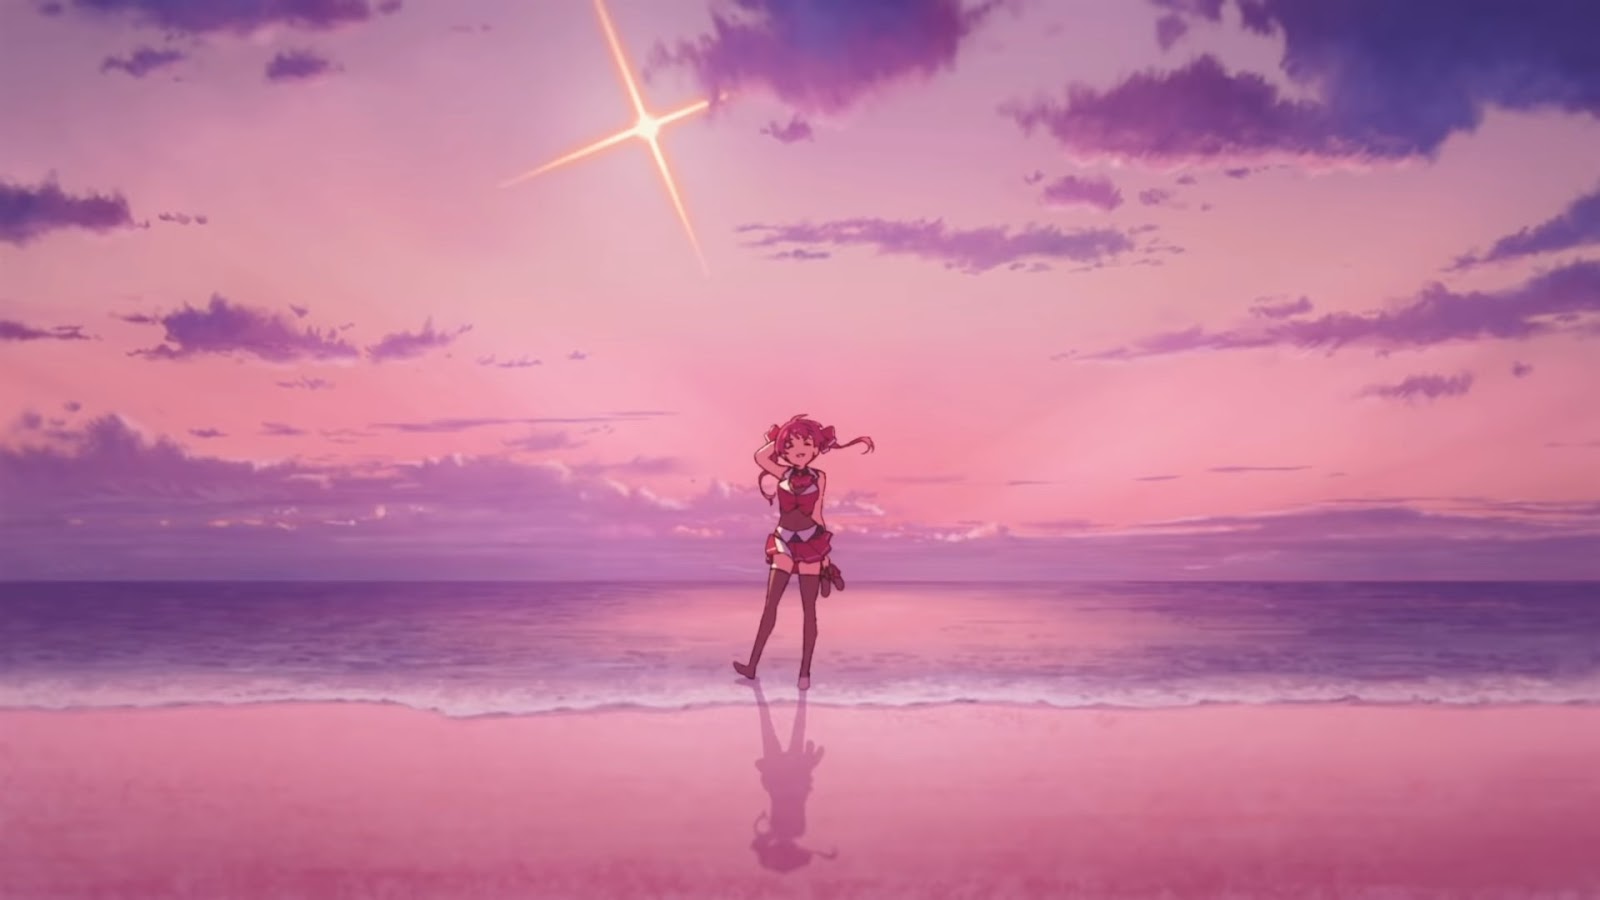 Marine standing on a beach at sunset with a star twinkling in the sky.